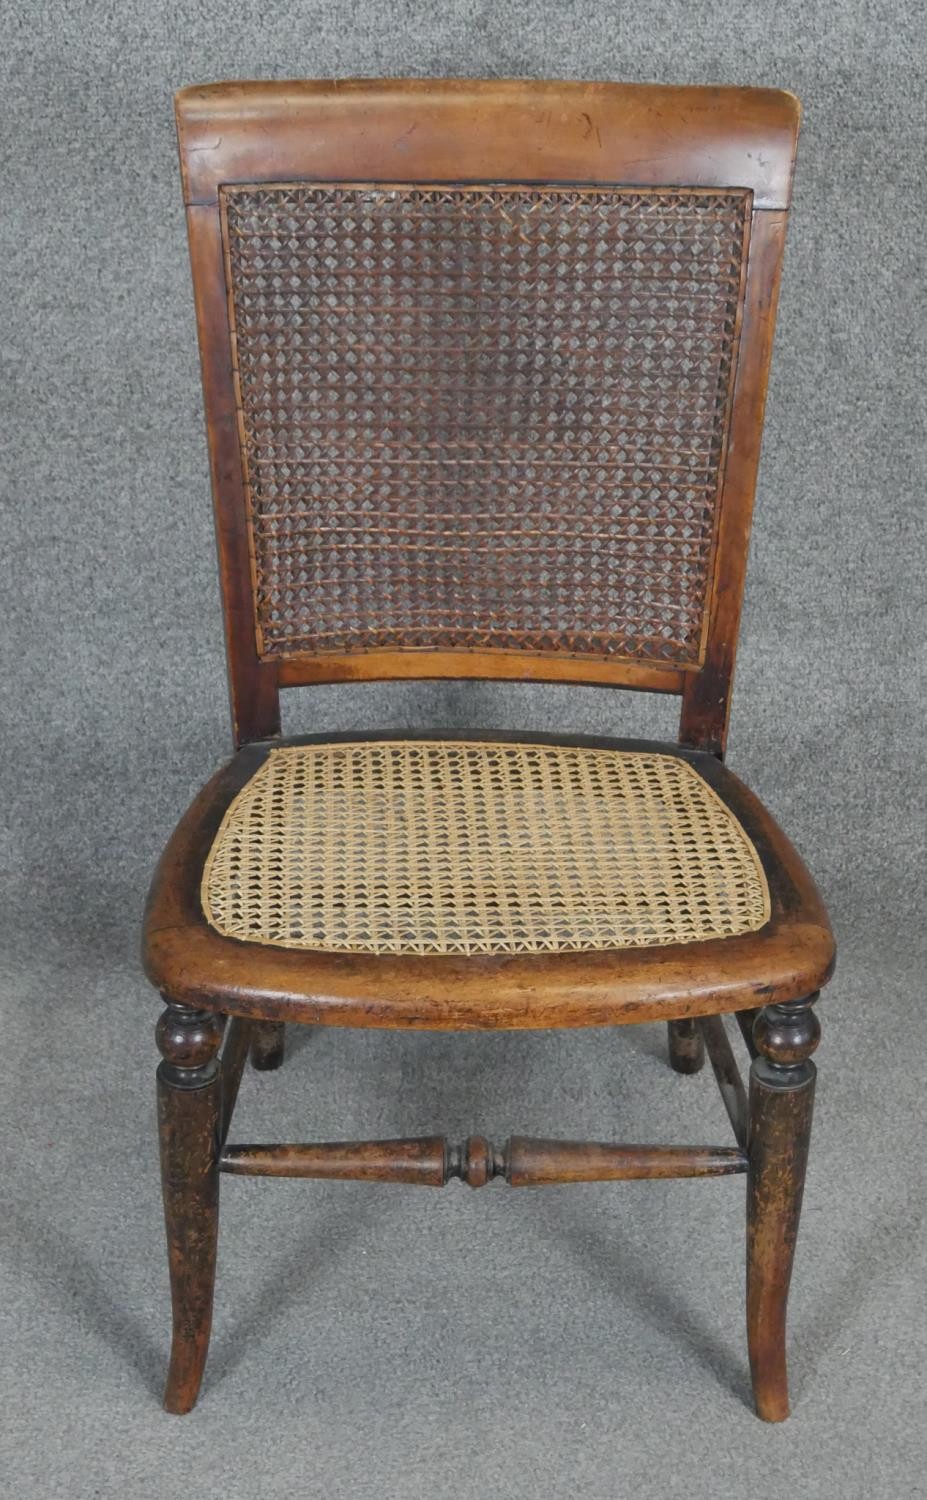 A 19th century walnut bedroom chair with woven seat and a similar caned seat beech chair. - Image 2 of 3